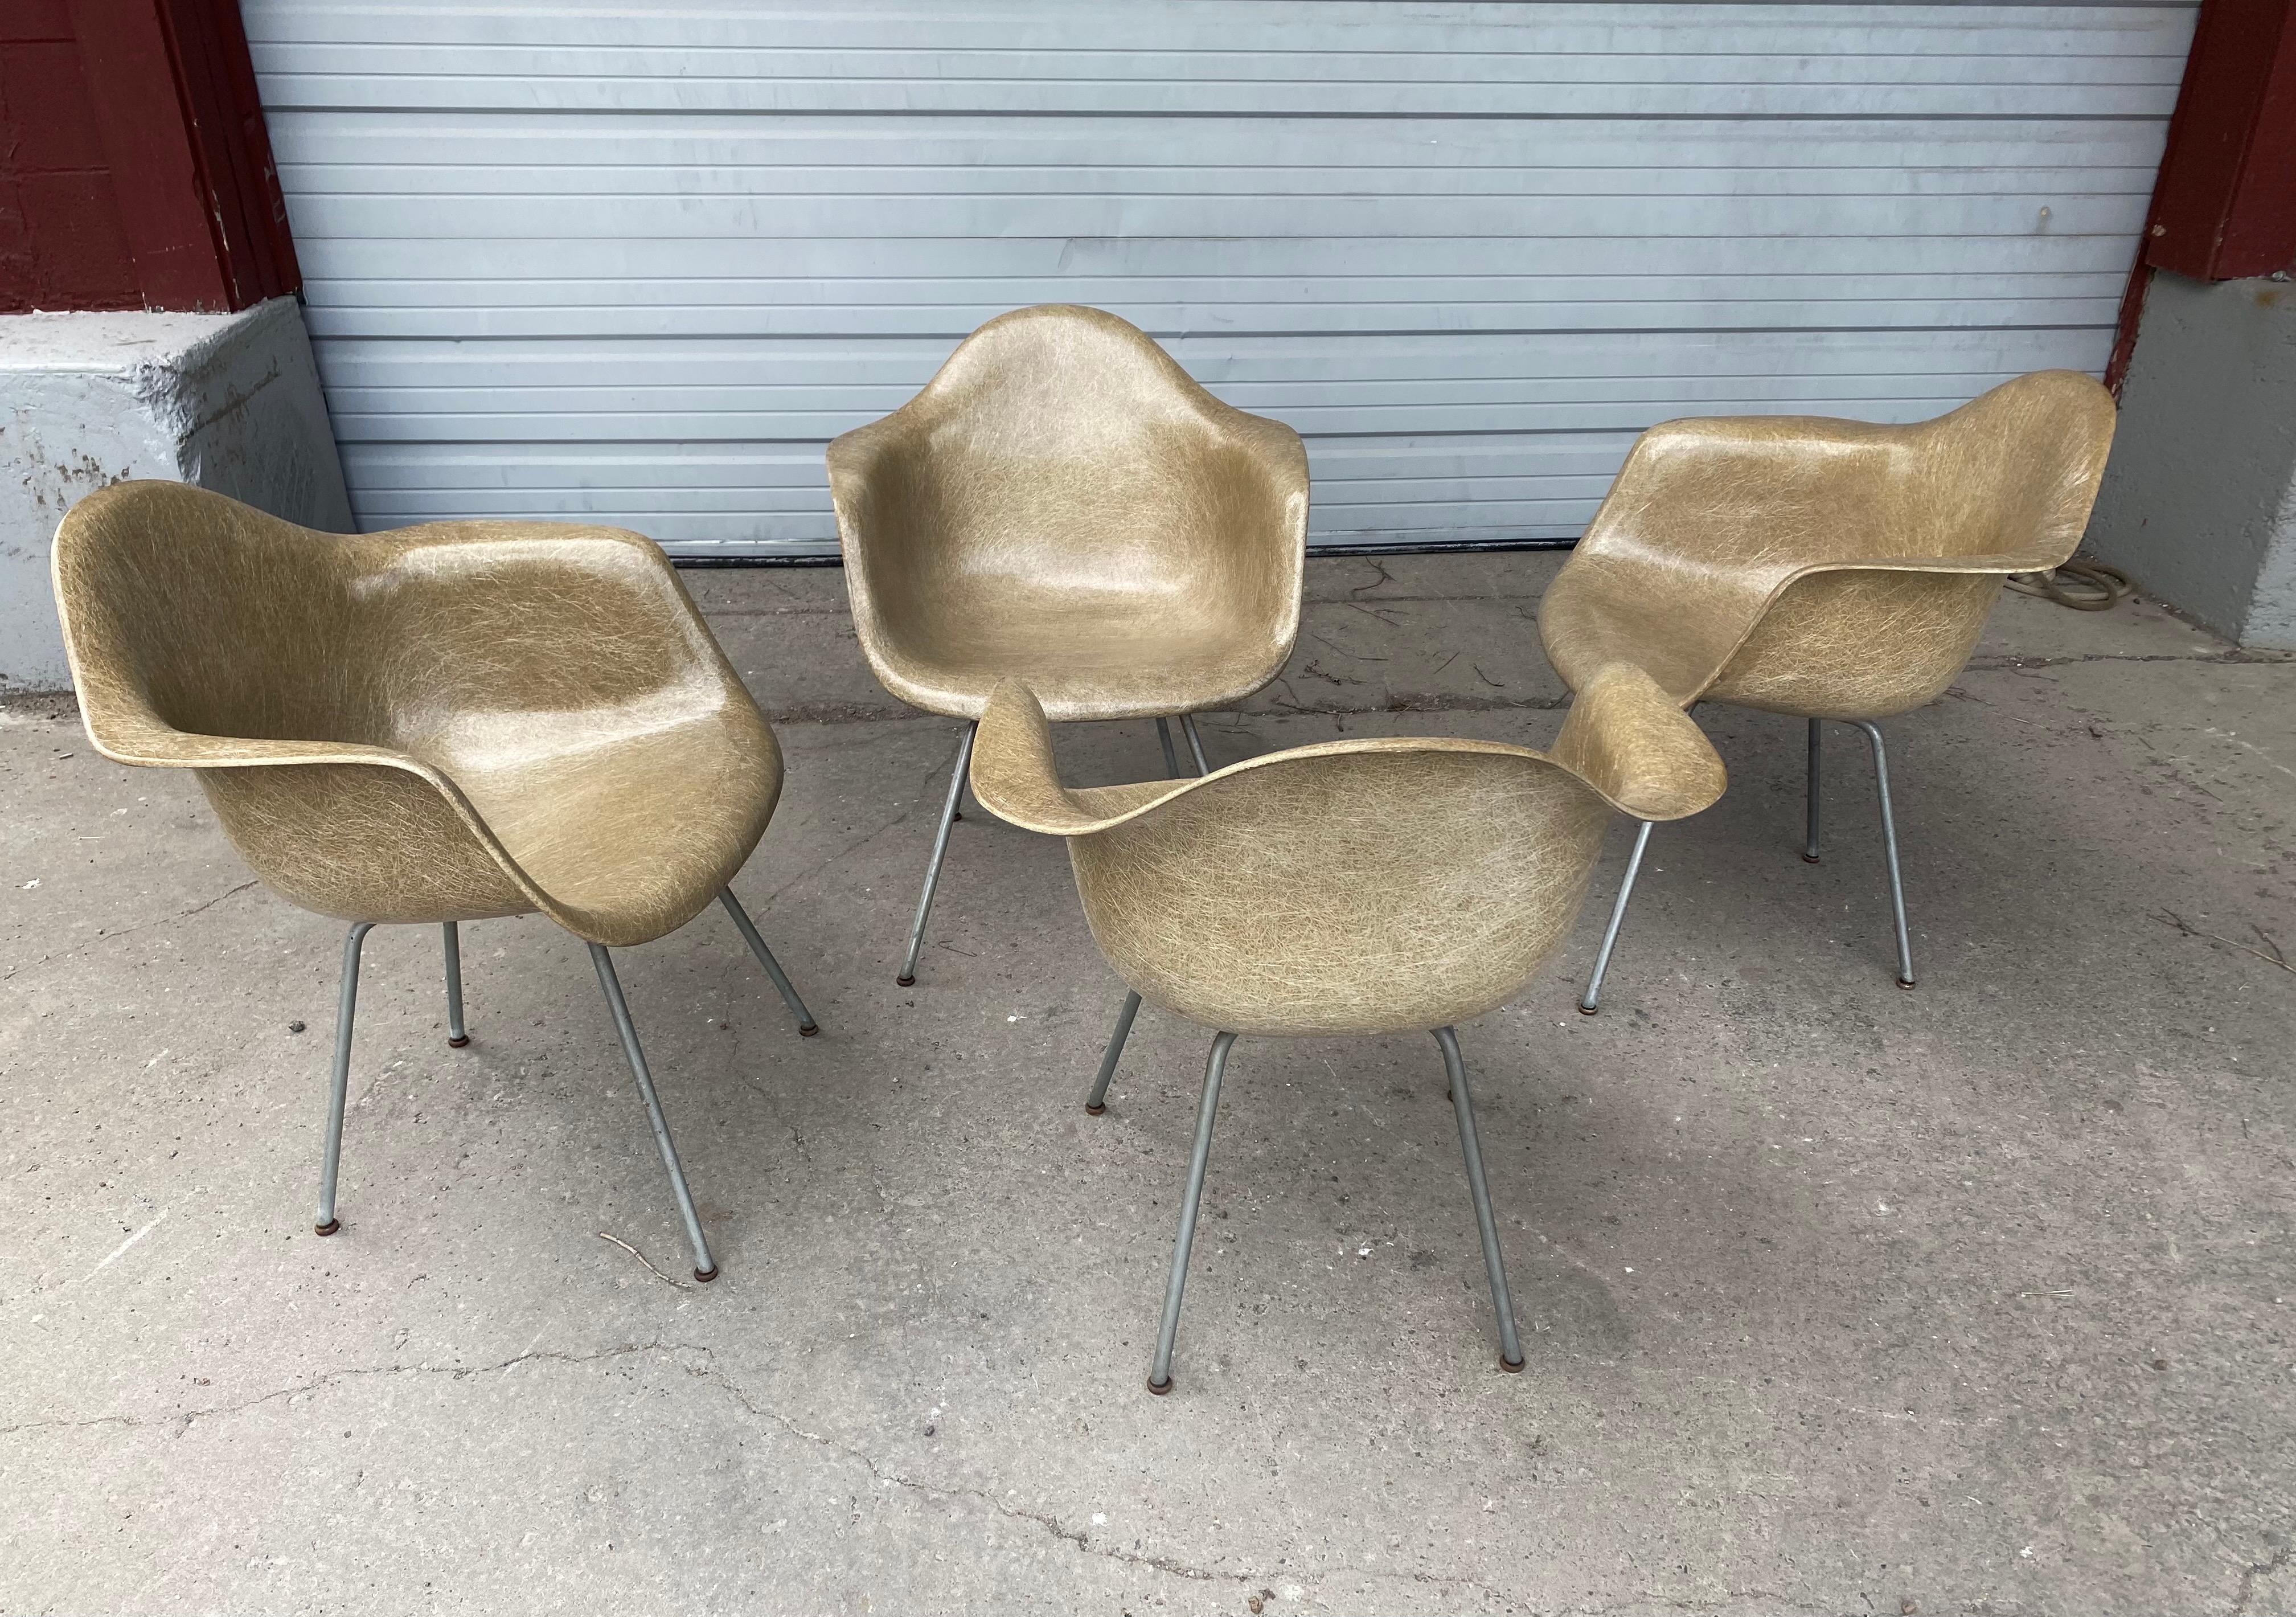 Rare, early set of 4 Charles and Ray Eames Fiberglass arm shell chairs, extremely rare 